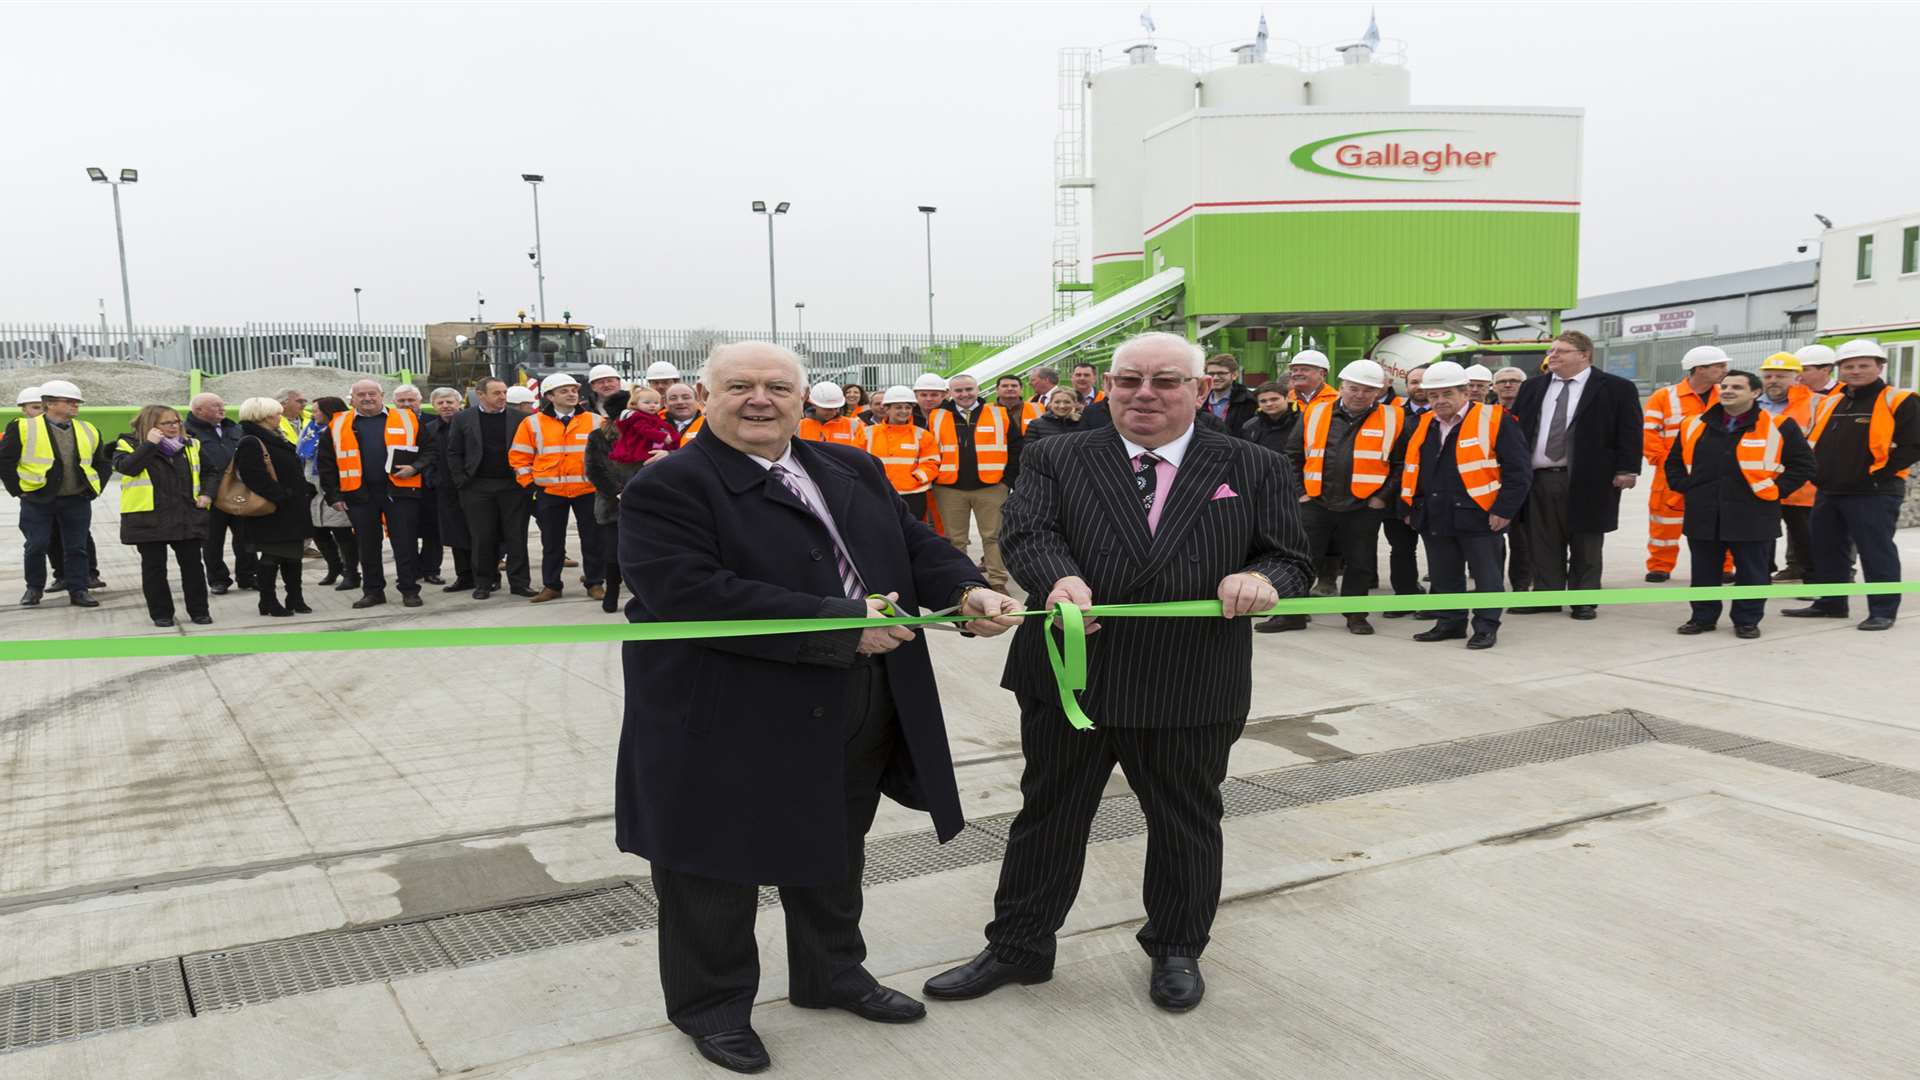 Ashford Borough Council leader Gerry Clarkson, left, cuts the ribbon on a new concrete and aggregate depot in Ashford with Pat Gallagher from Gallagher Group